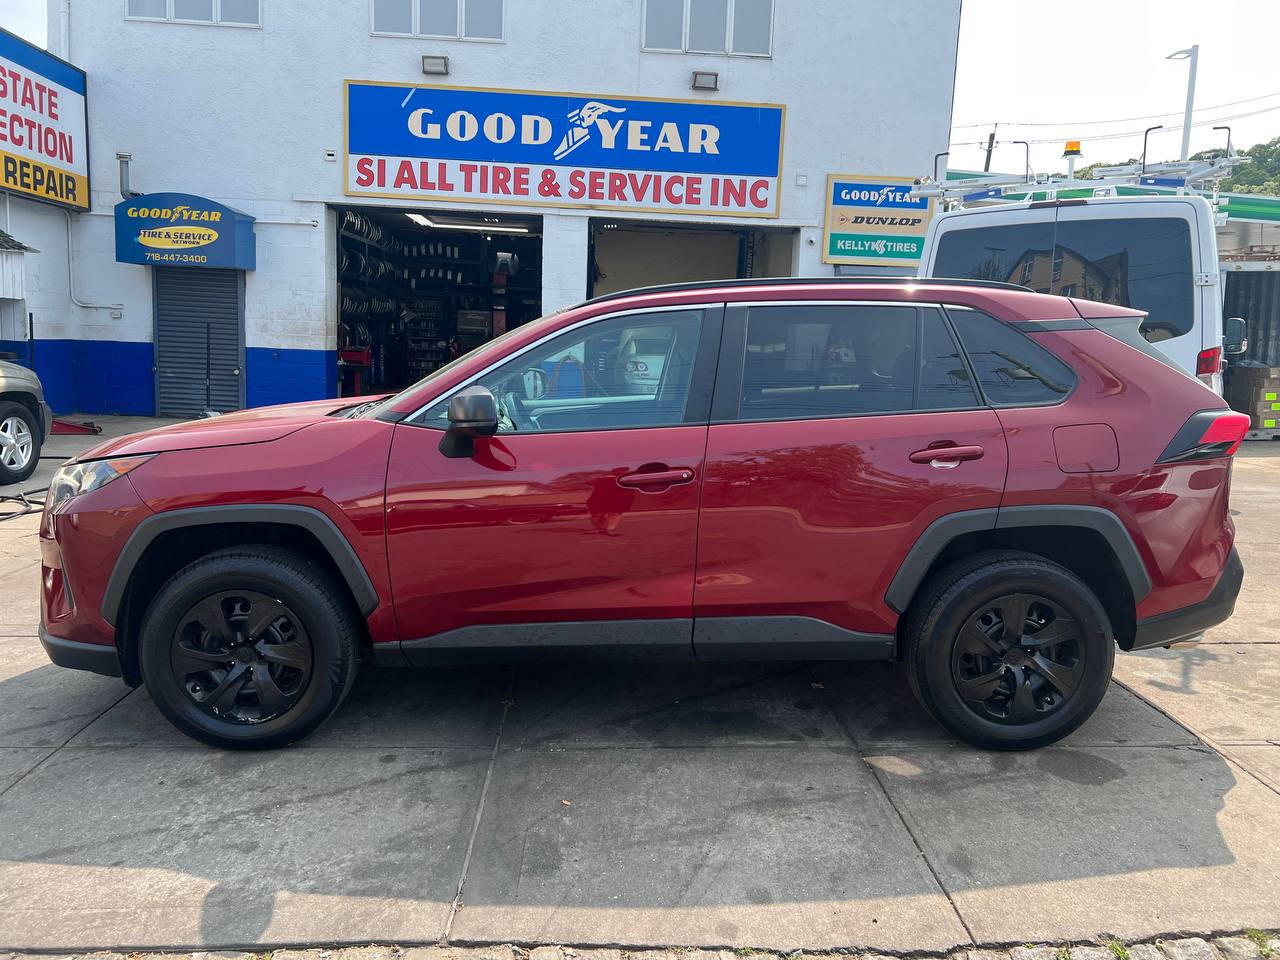 Used - Toyota RAV4 LE AWD SUV for sale in Staten Island NY